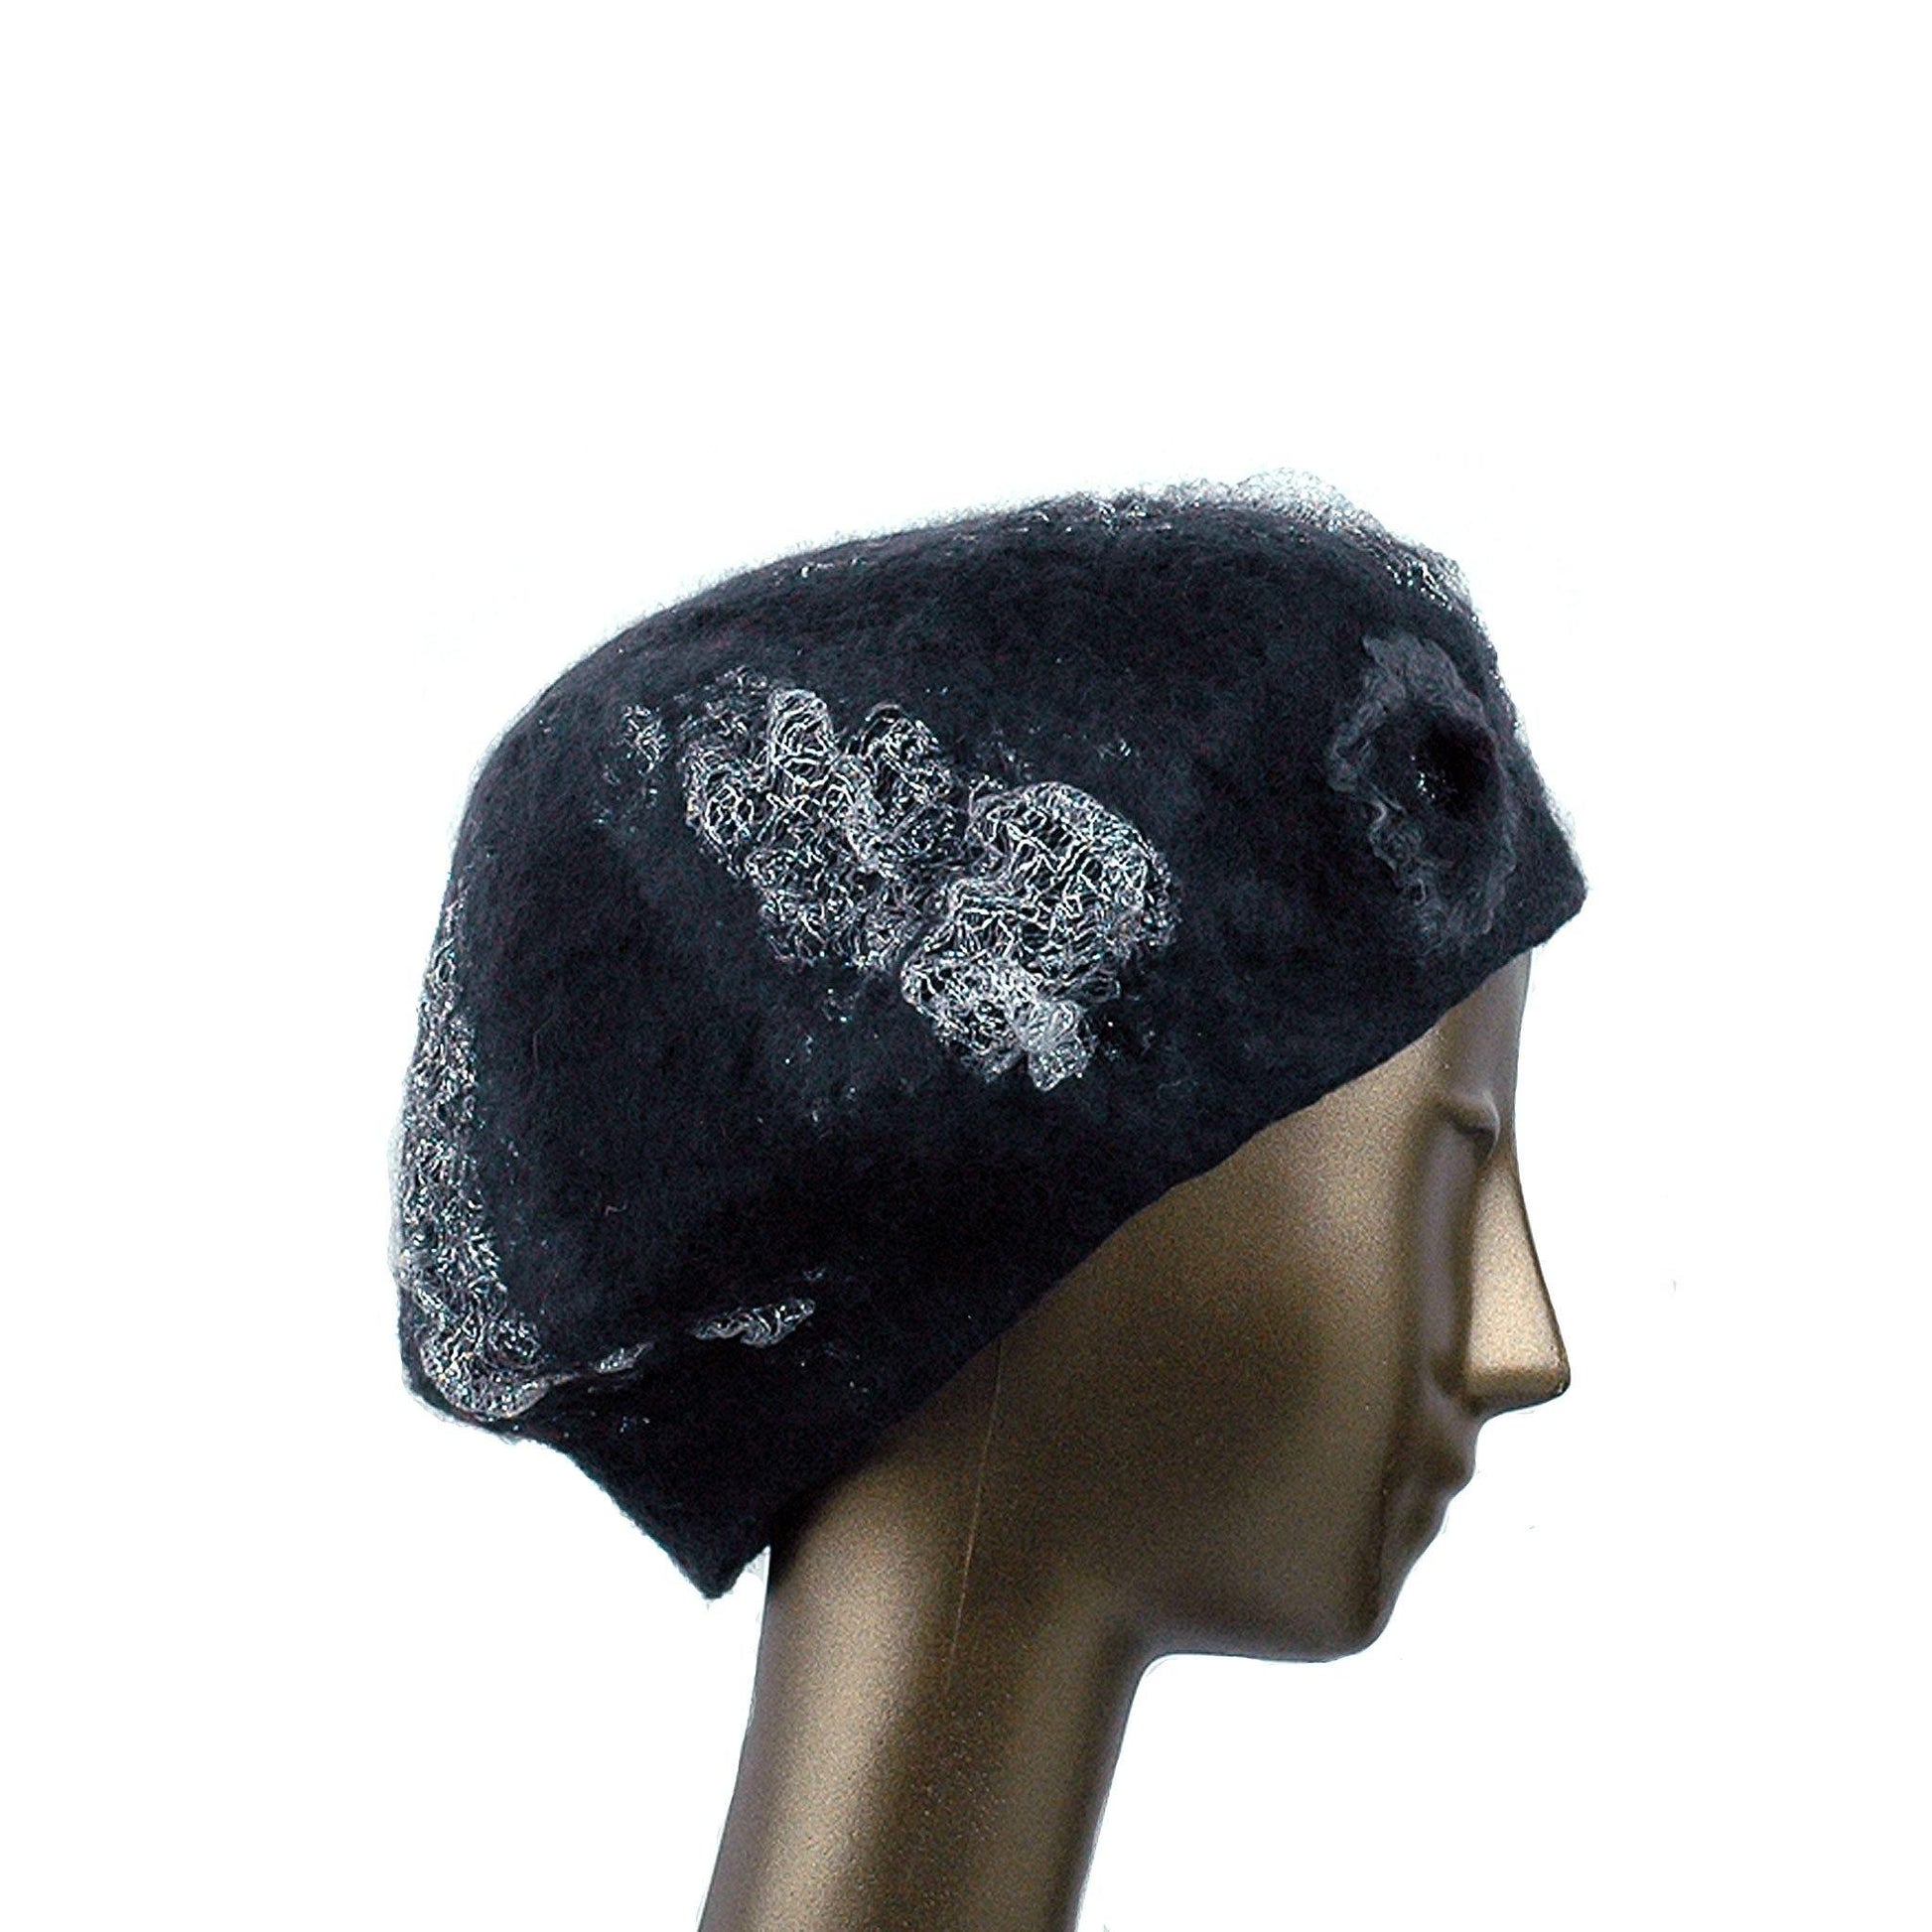 Charcoal Black Beret with Silver Nunofelt - side view